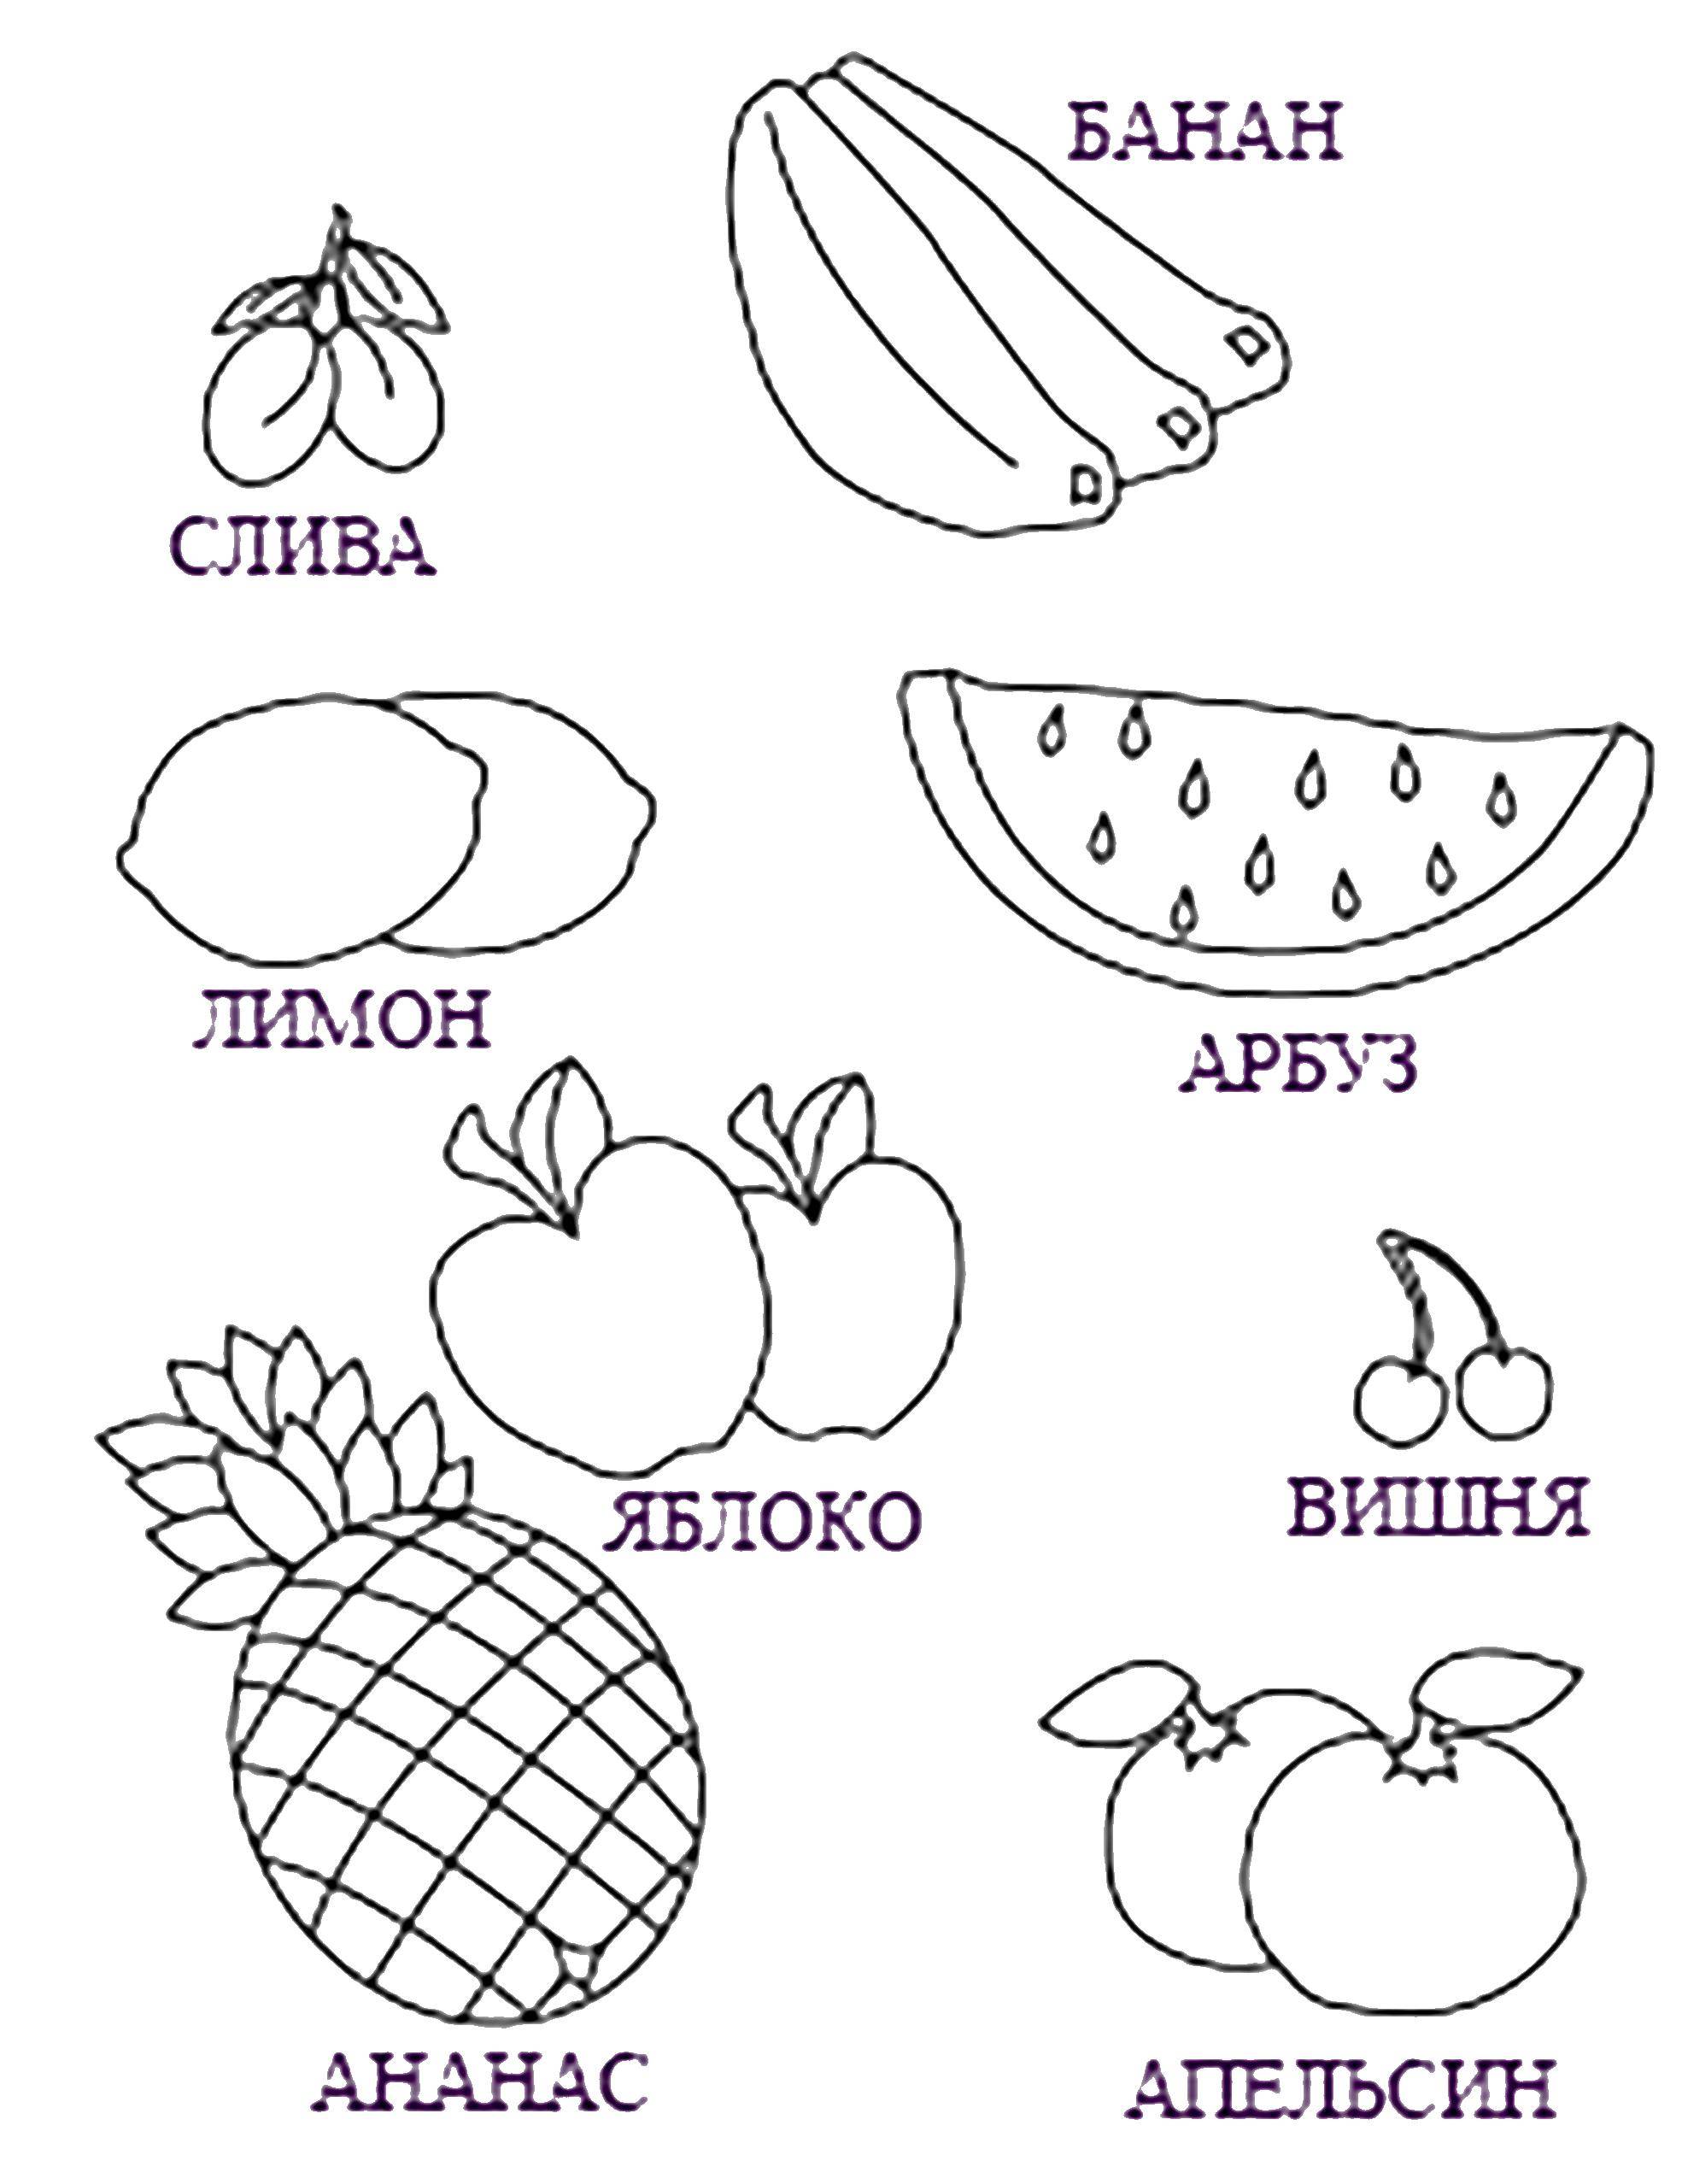 Coloring Names of fruit. Category fruits. Tags:  fruits.